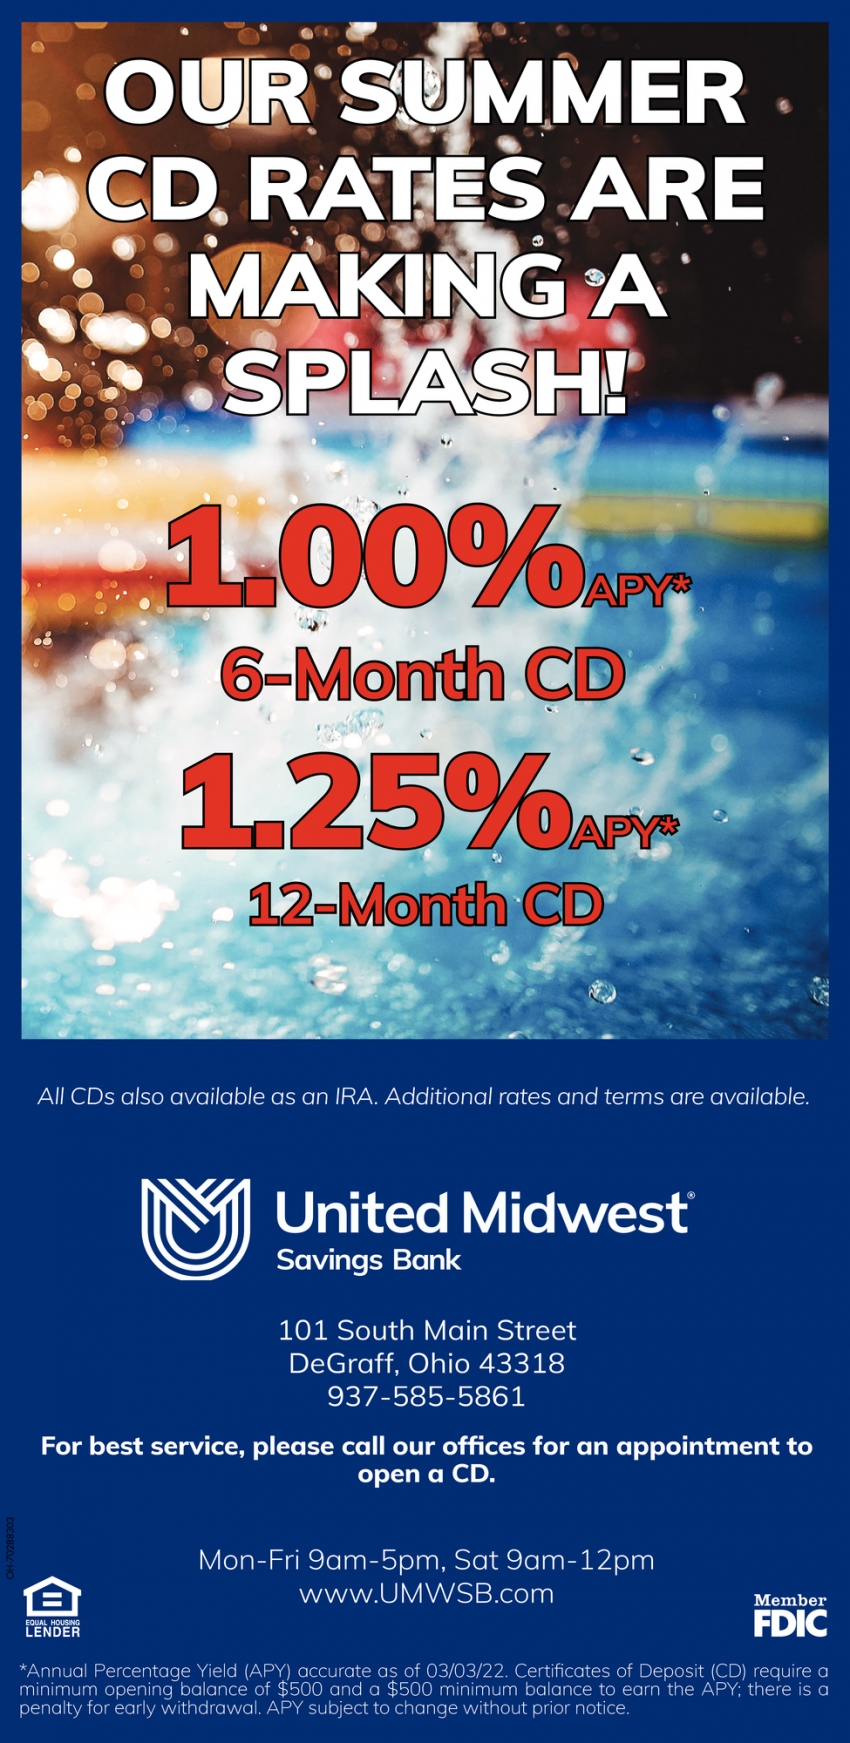 Our Summer CD Rates Are making A Splash